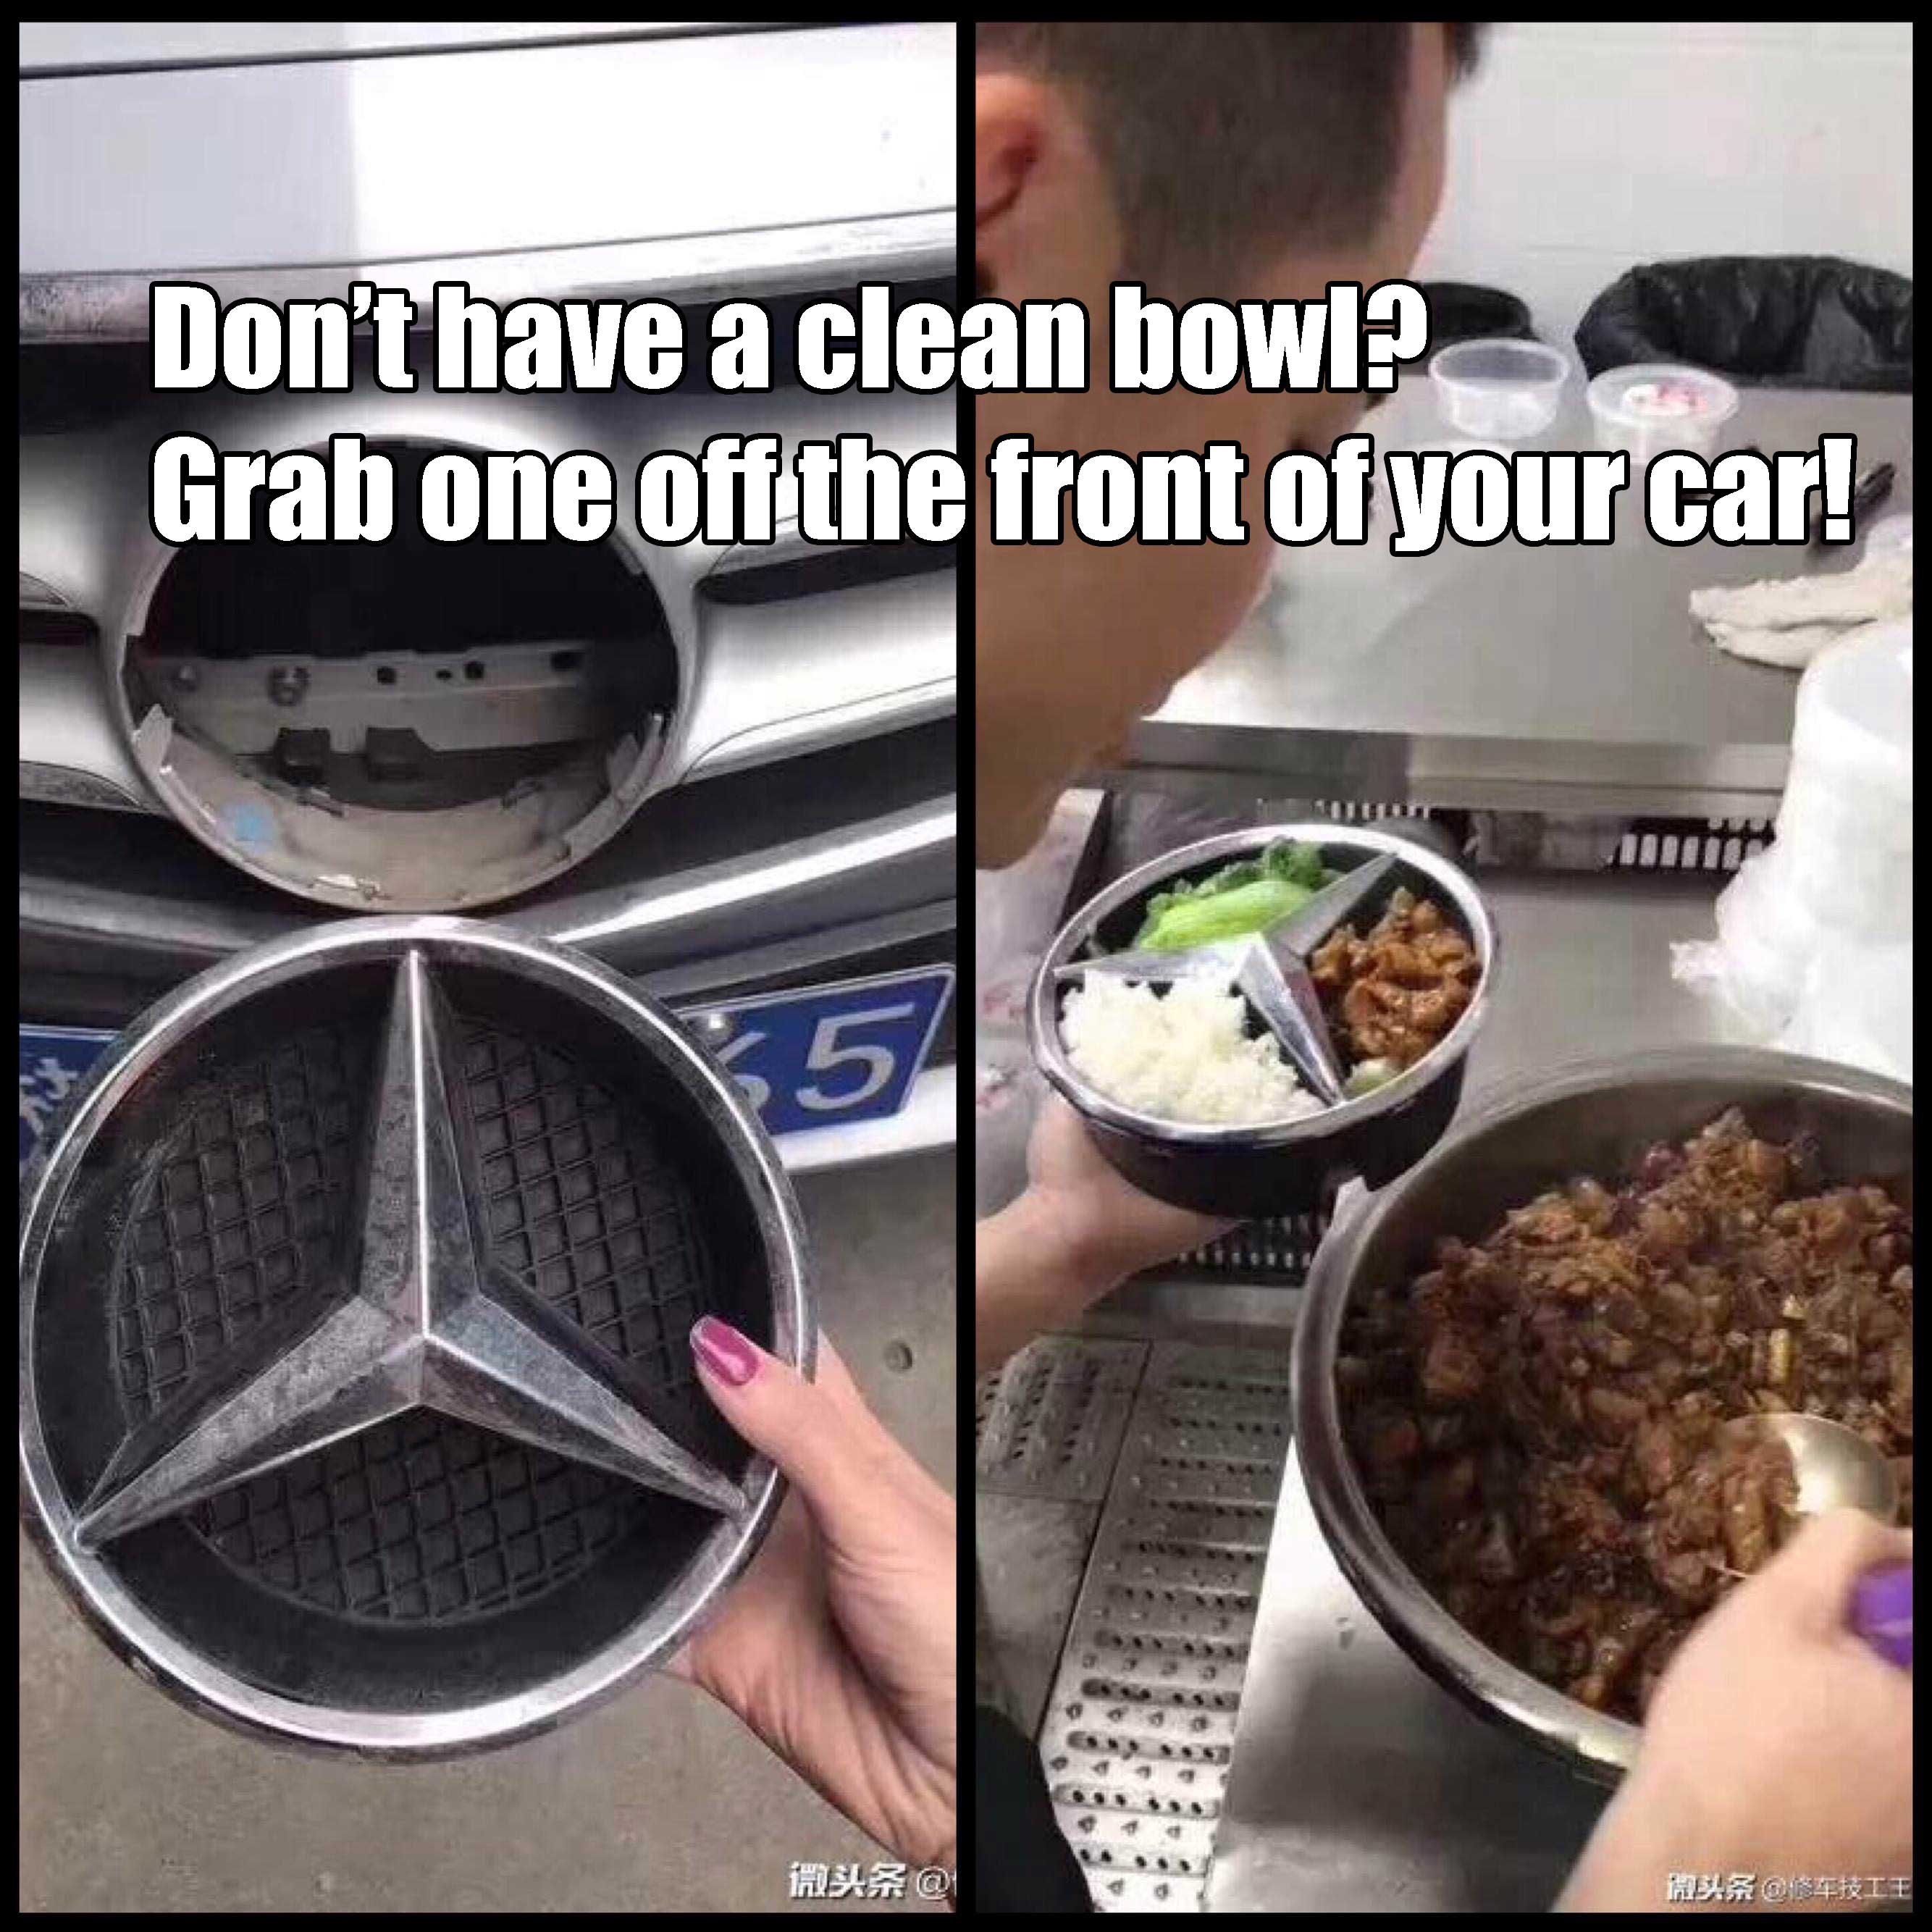 mercedes meme - Don't have a clean bowl? Grab one off the front of your car!